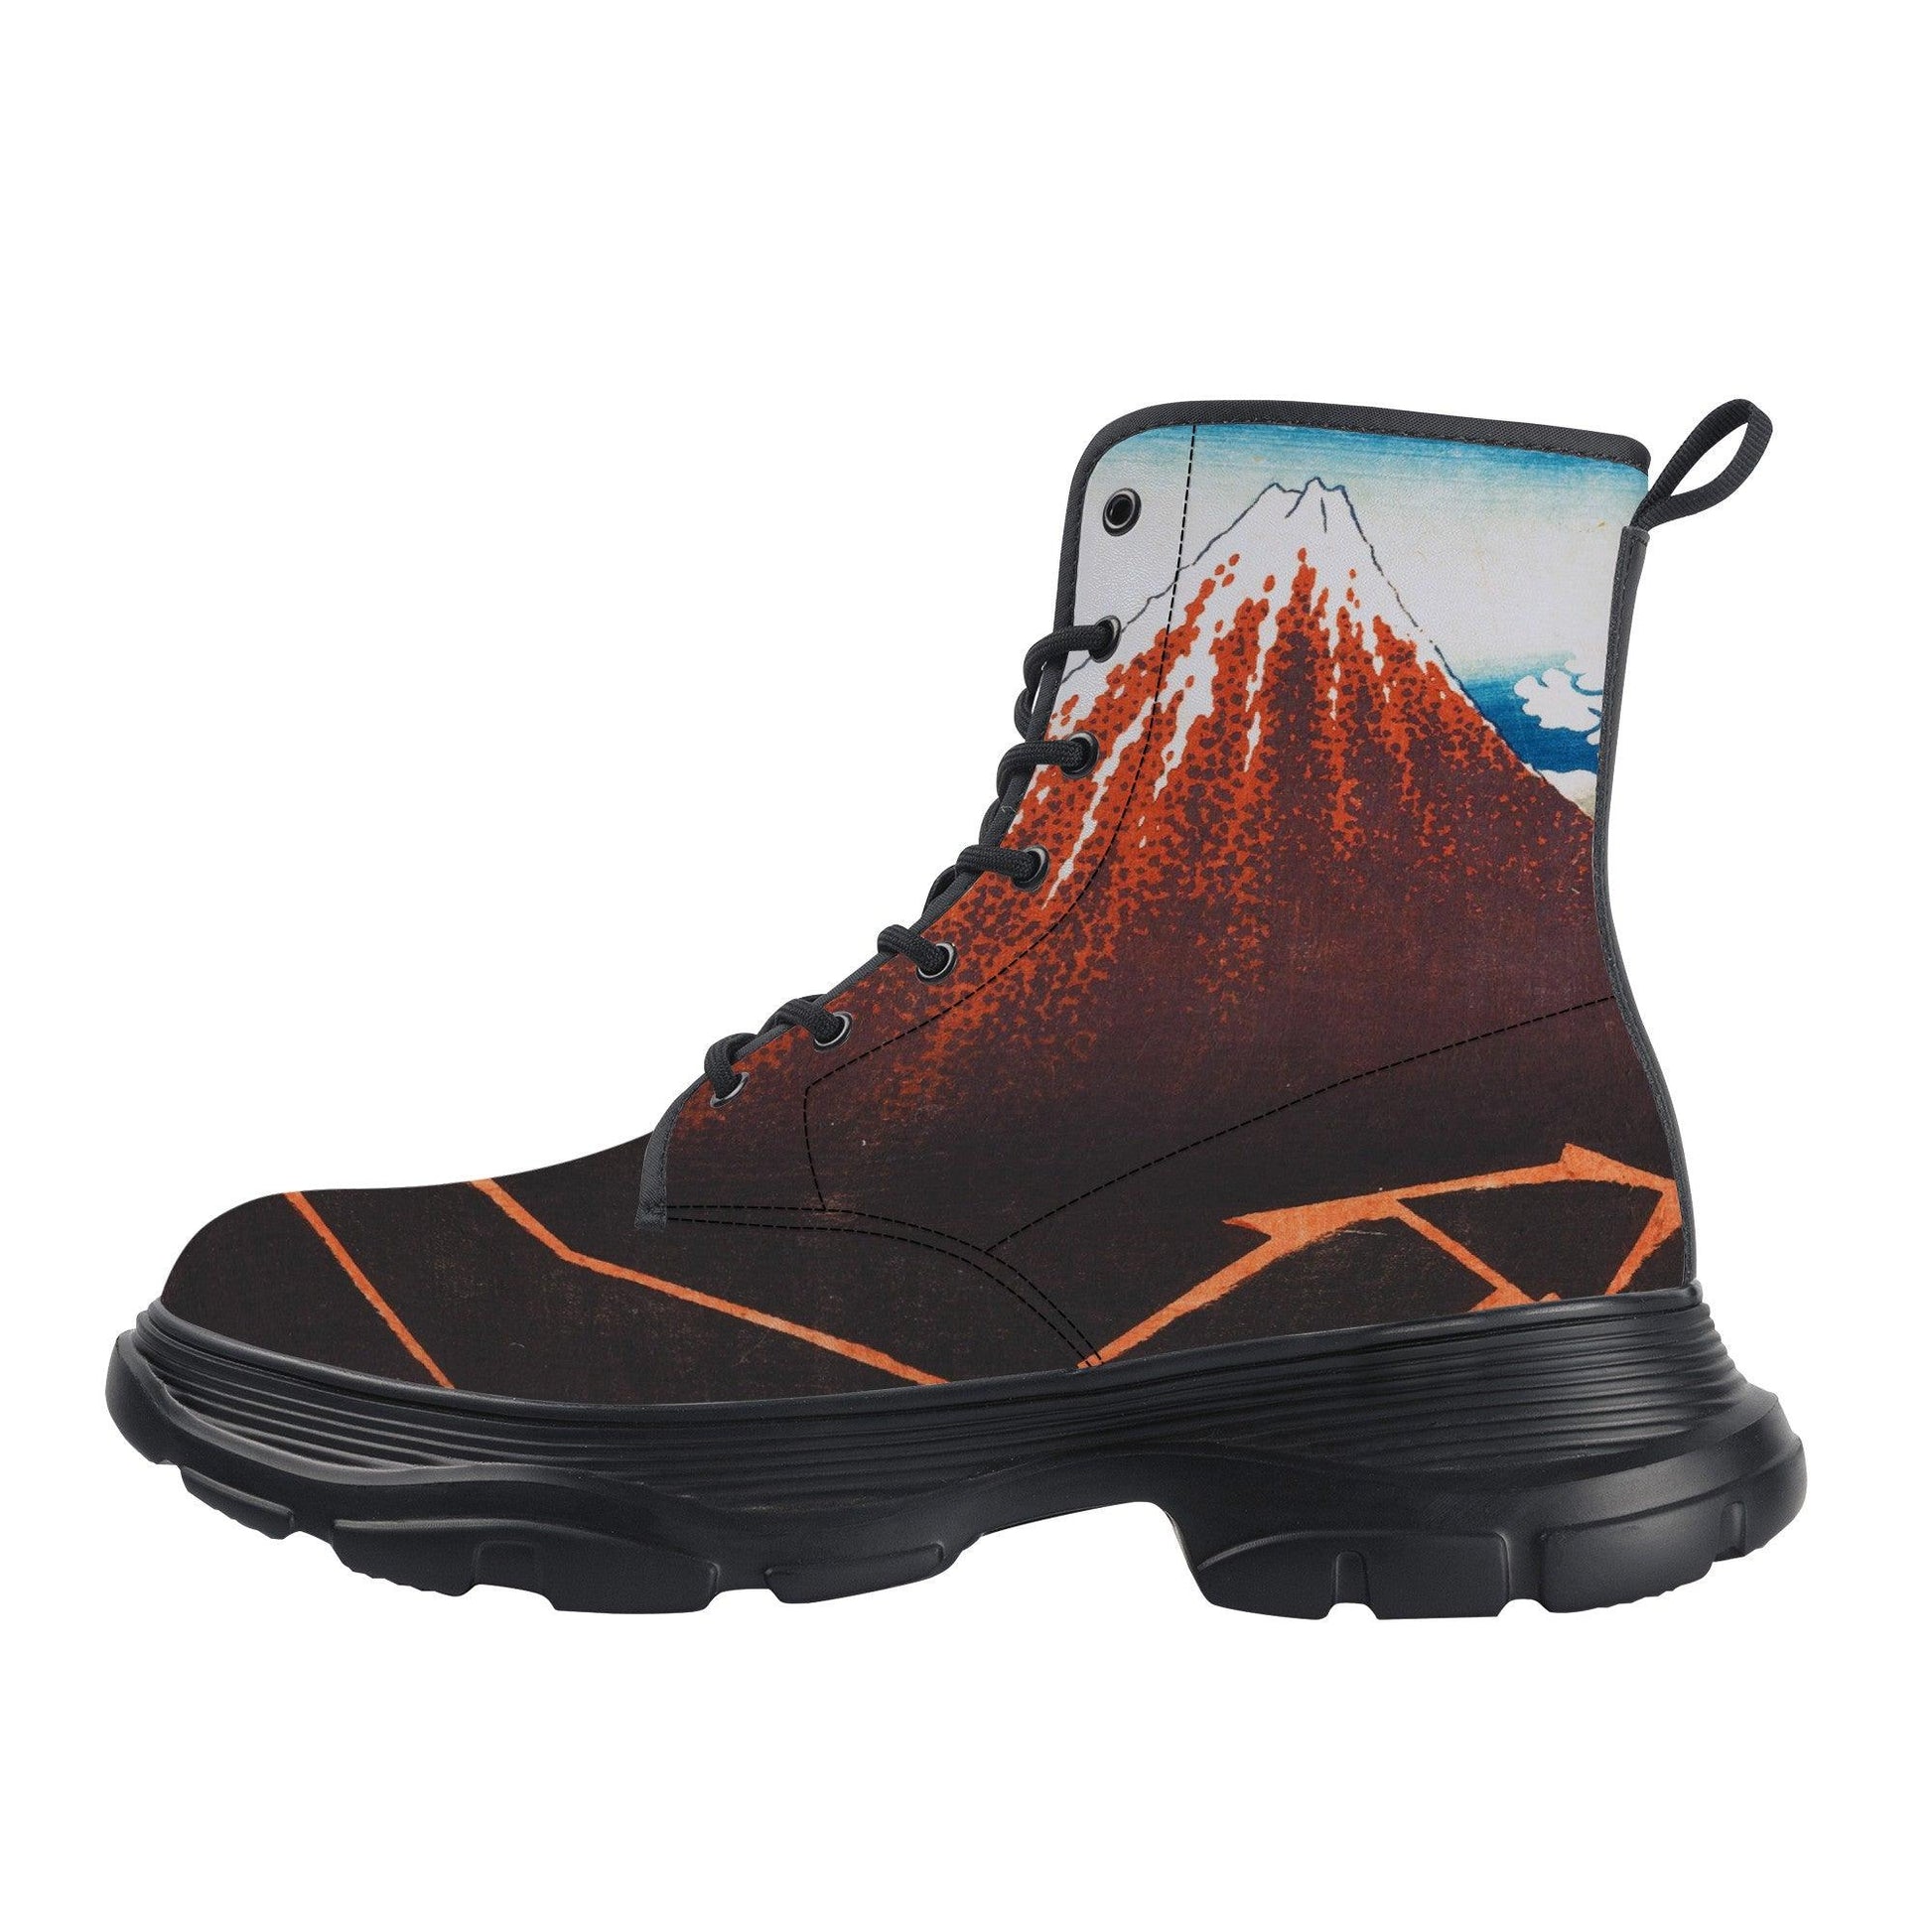 Sanka Hakuu by Katsushika Hokusai (1760-1849), meaning Shower below a summit, a traditional Japanese Ukyio-e style illustration of Mount Fuji. Design applied to All weather, waterproof Chunk boots